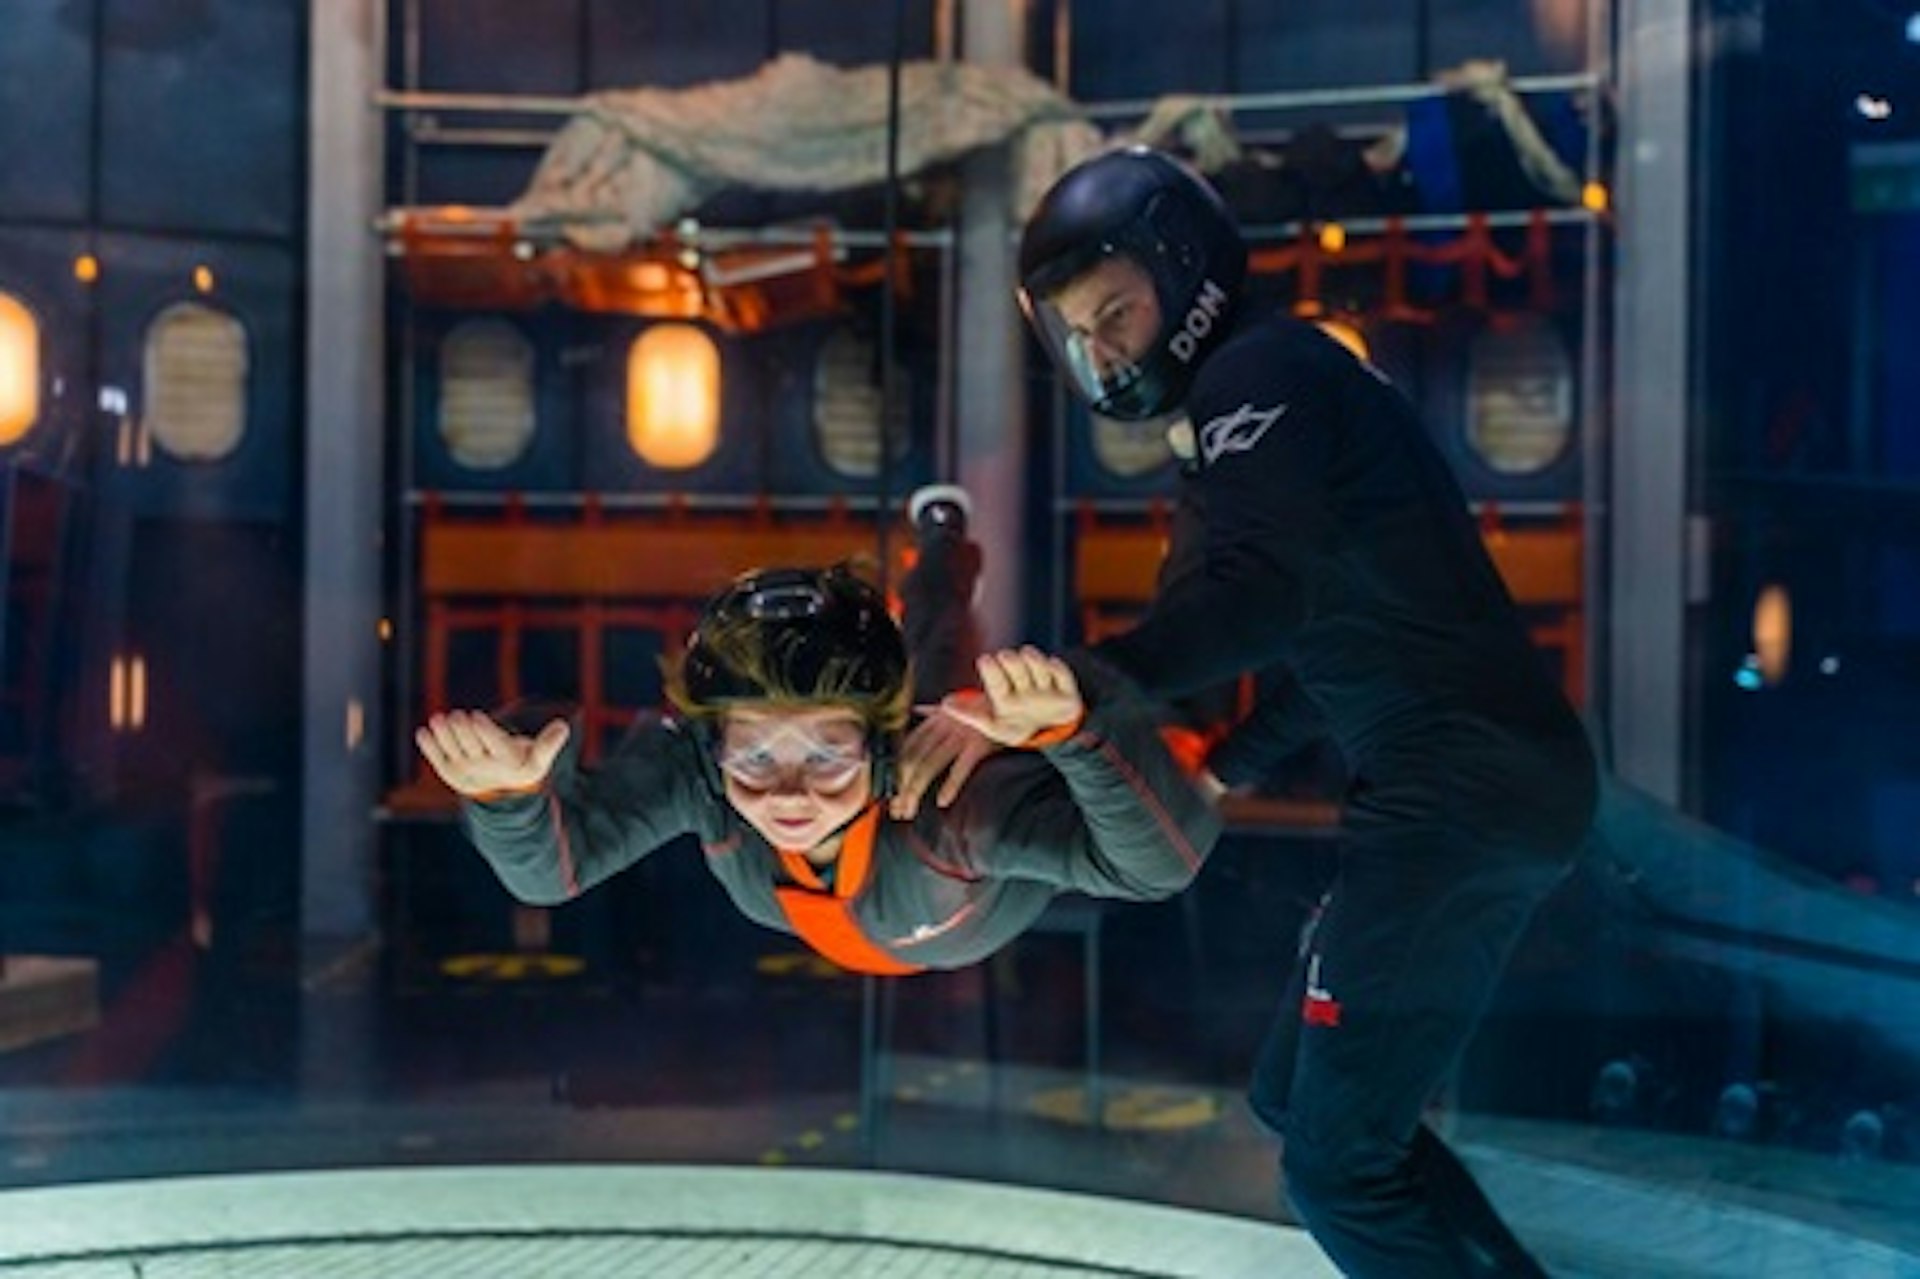 iFly Indoor Skydiving and High Ropes for Two at The Bear Grylls Adventure